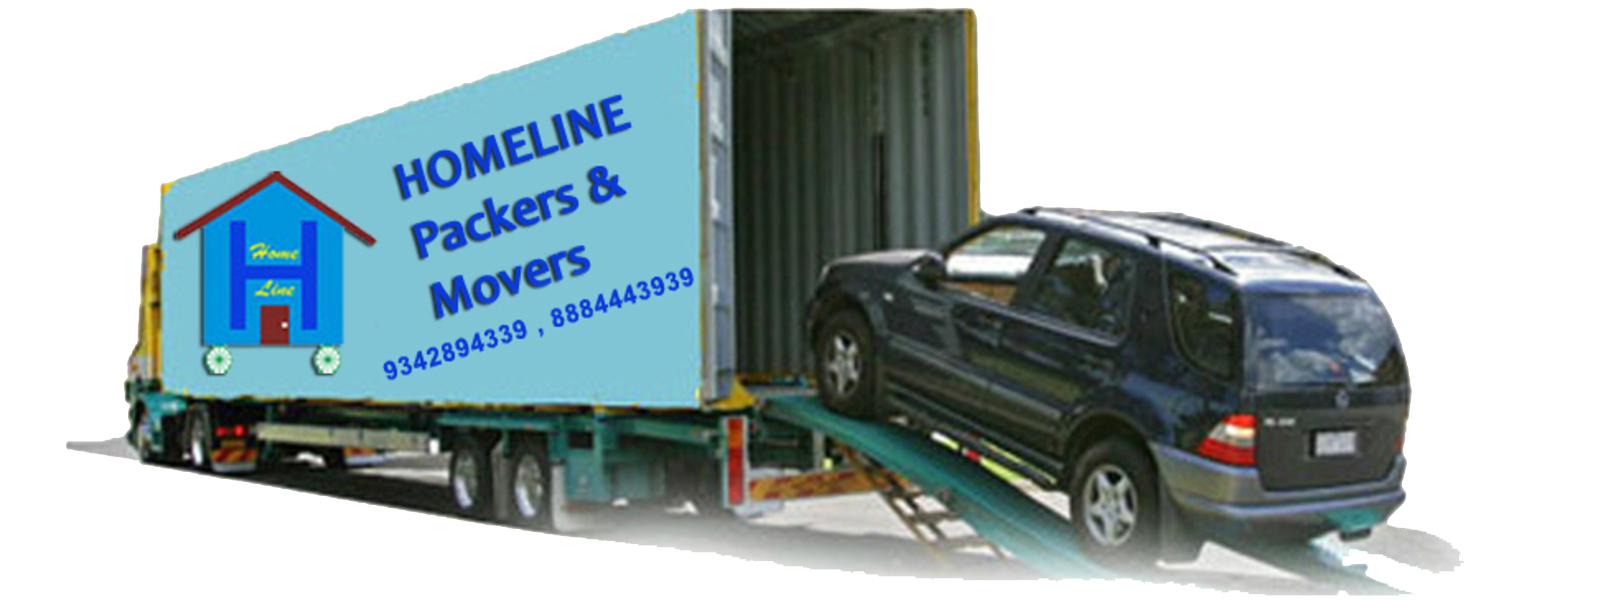 Homeline best packers and movers Bangalore